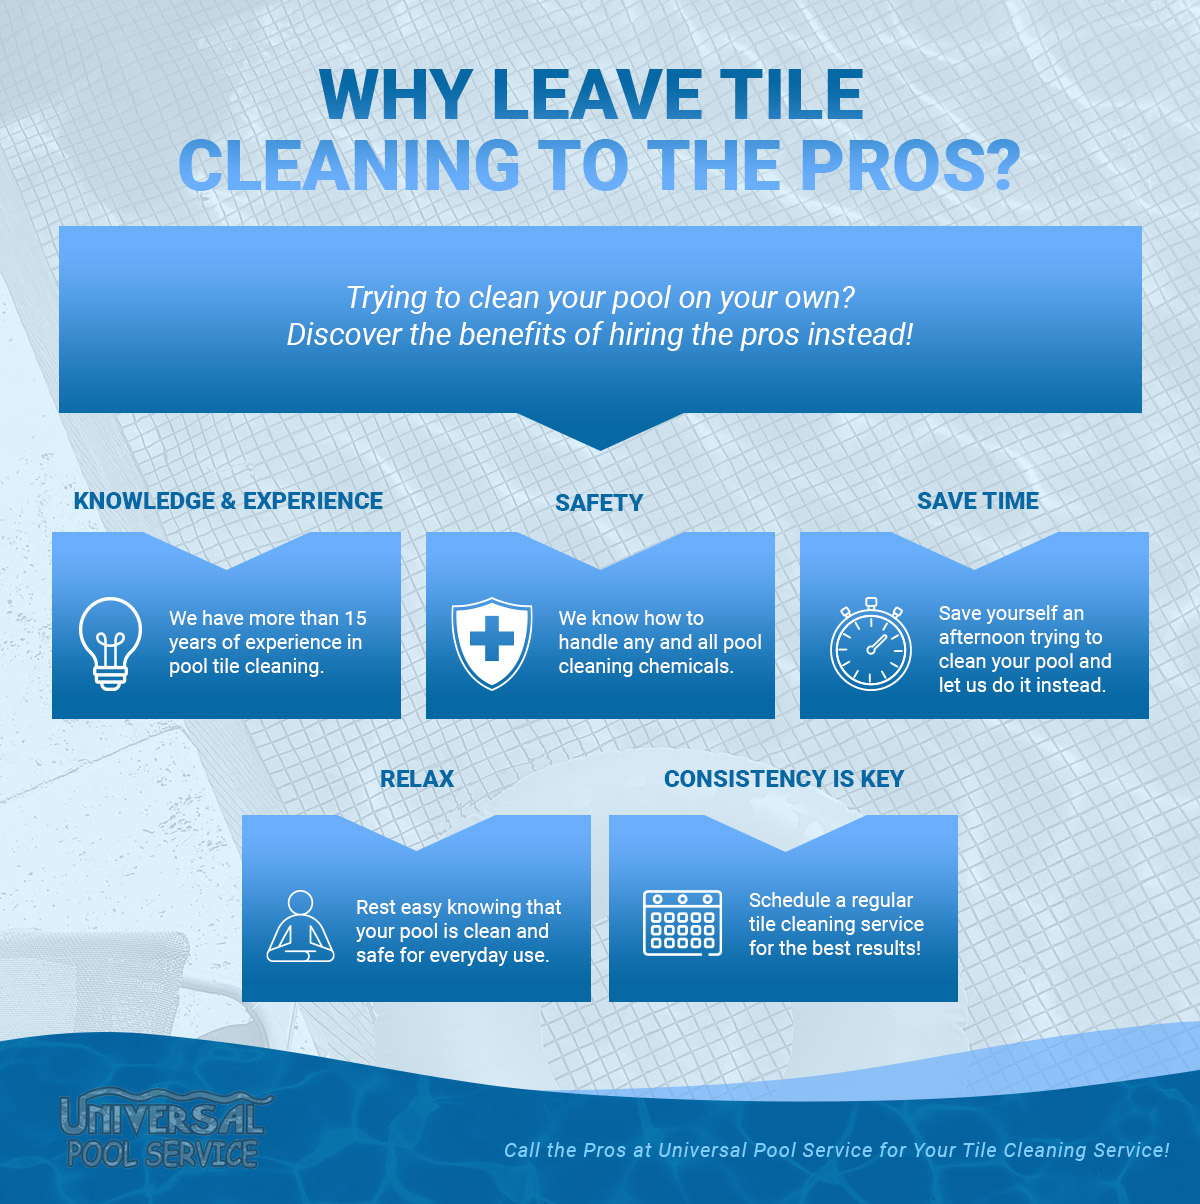 Why-Leave-Tile-Cleaning-to-the-Pros-5faad65b8aeb6